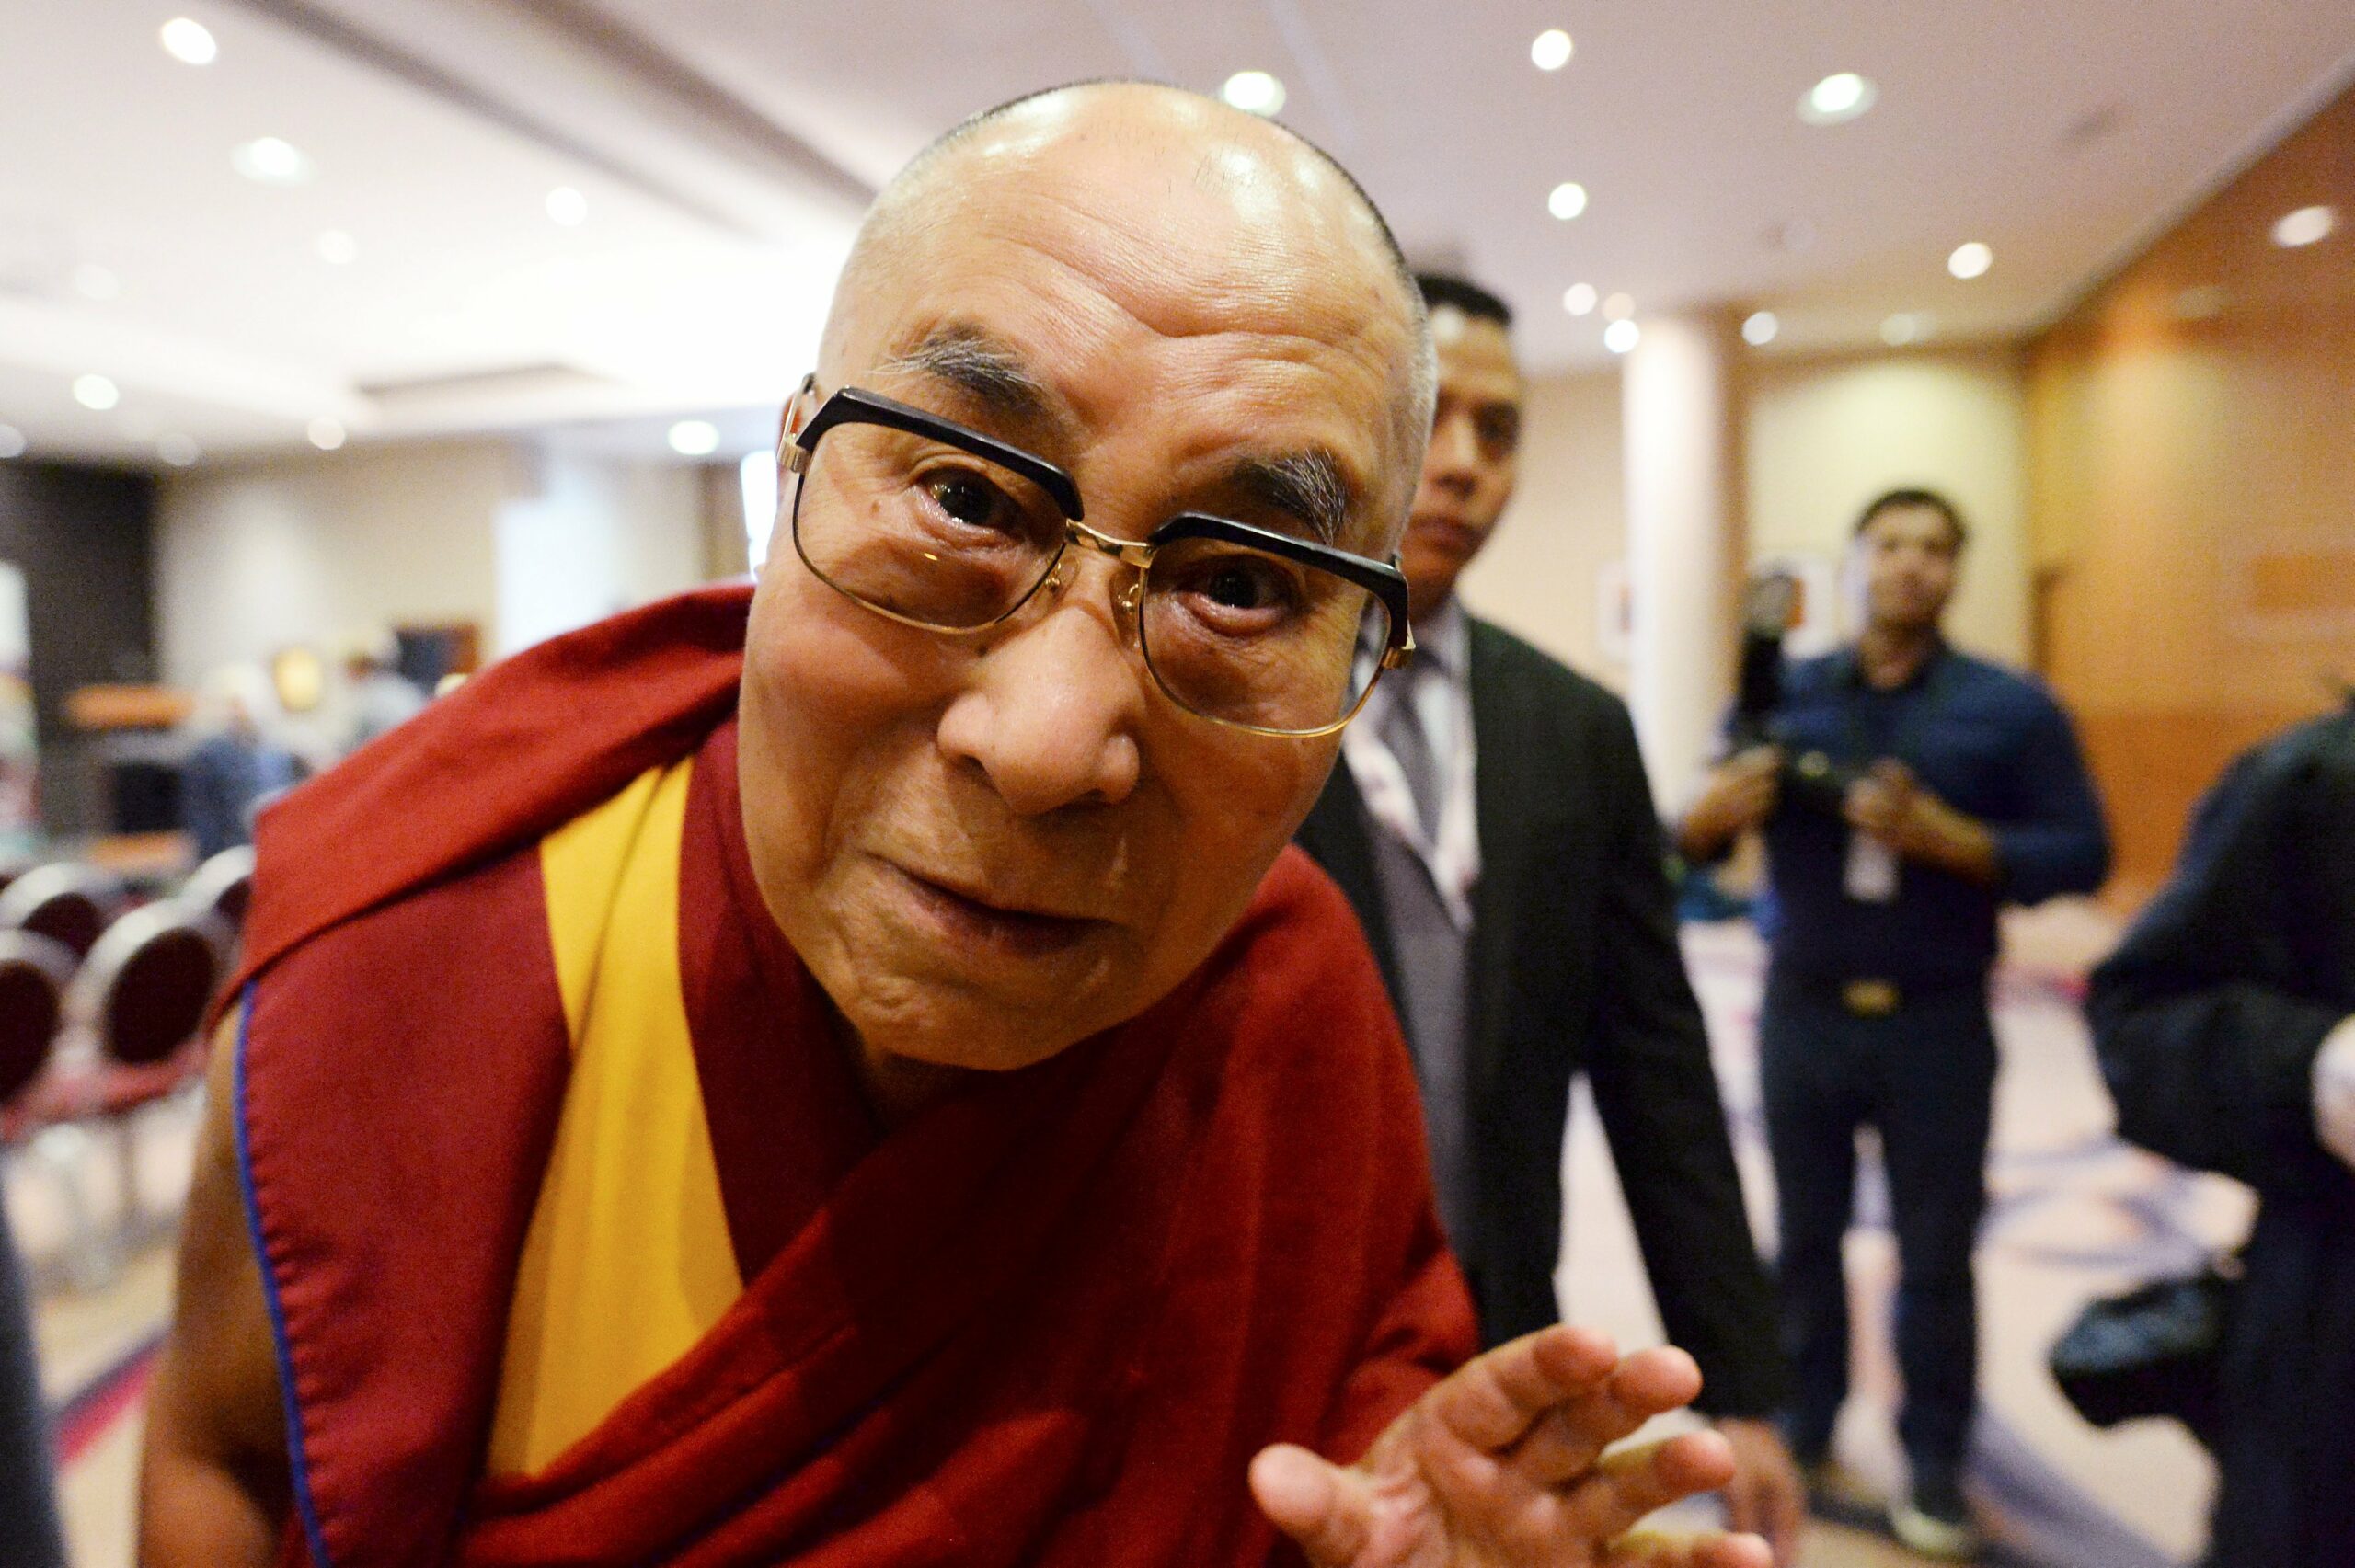 Is the Dalai Lama married? What recent controversy has the Dalai Lama been in?